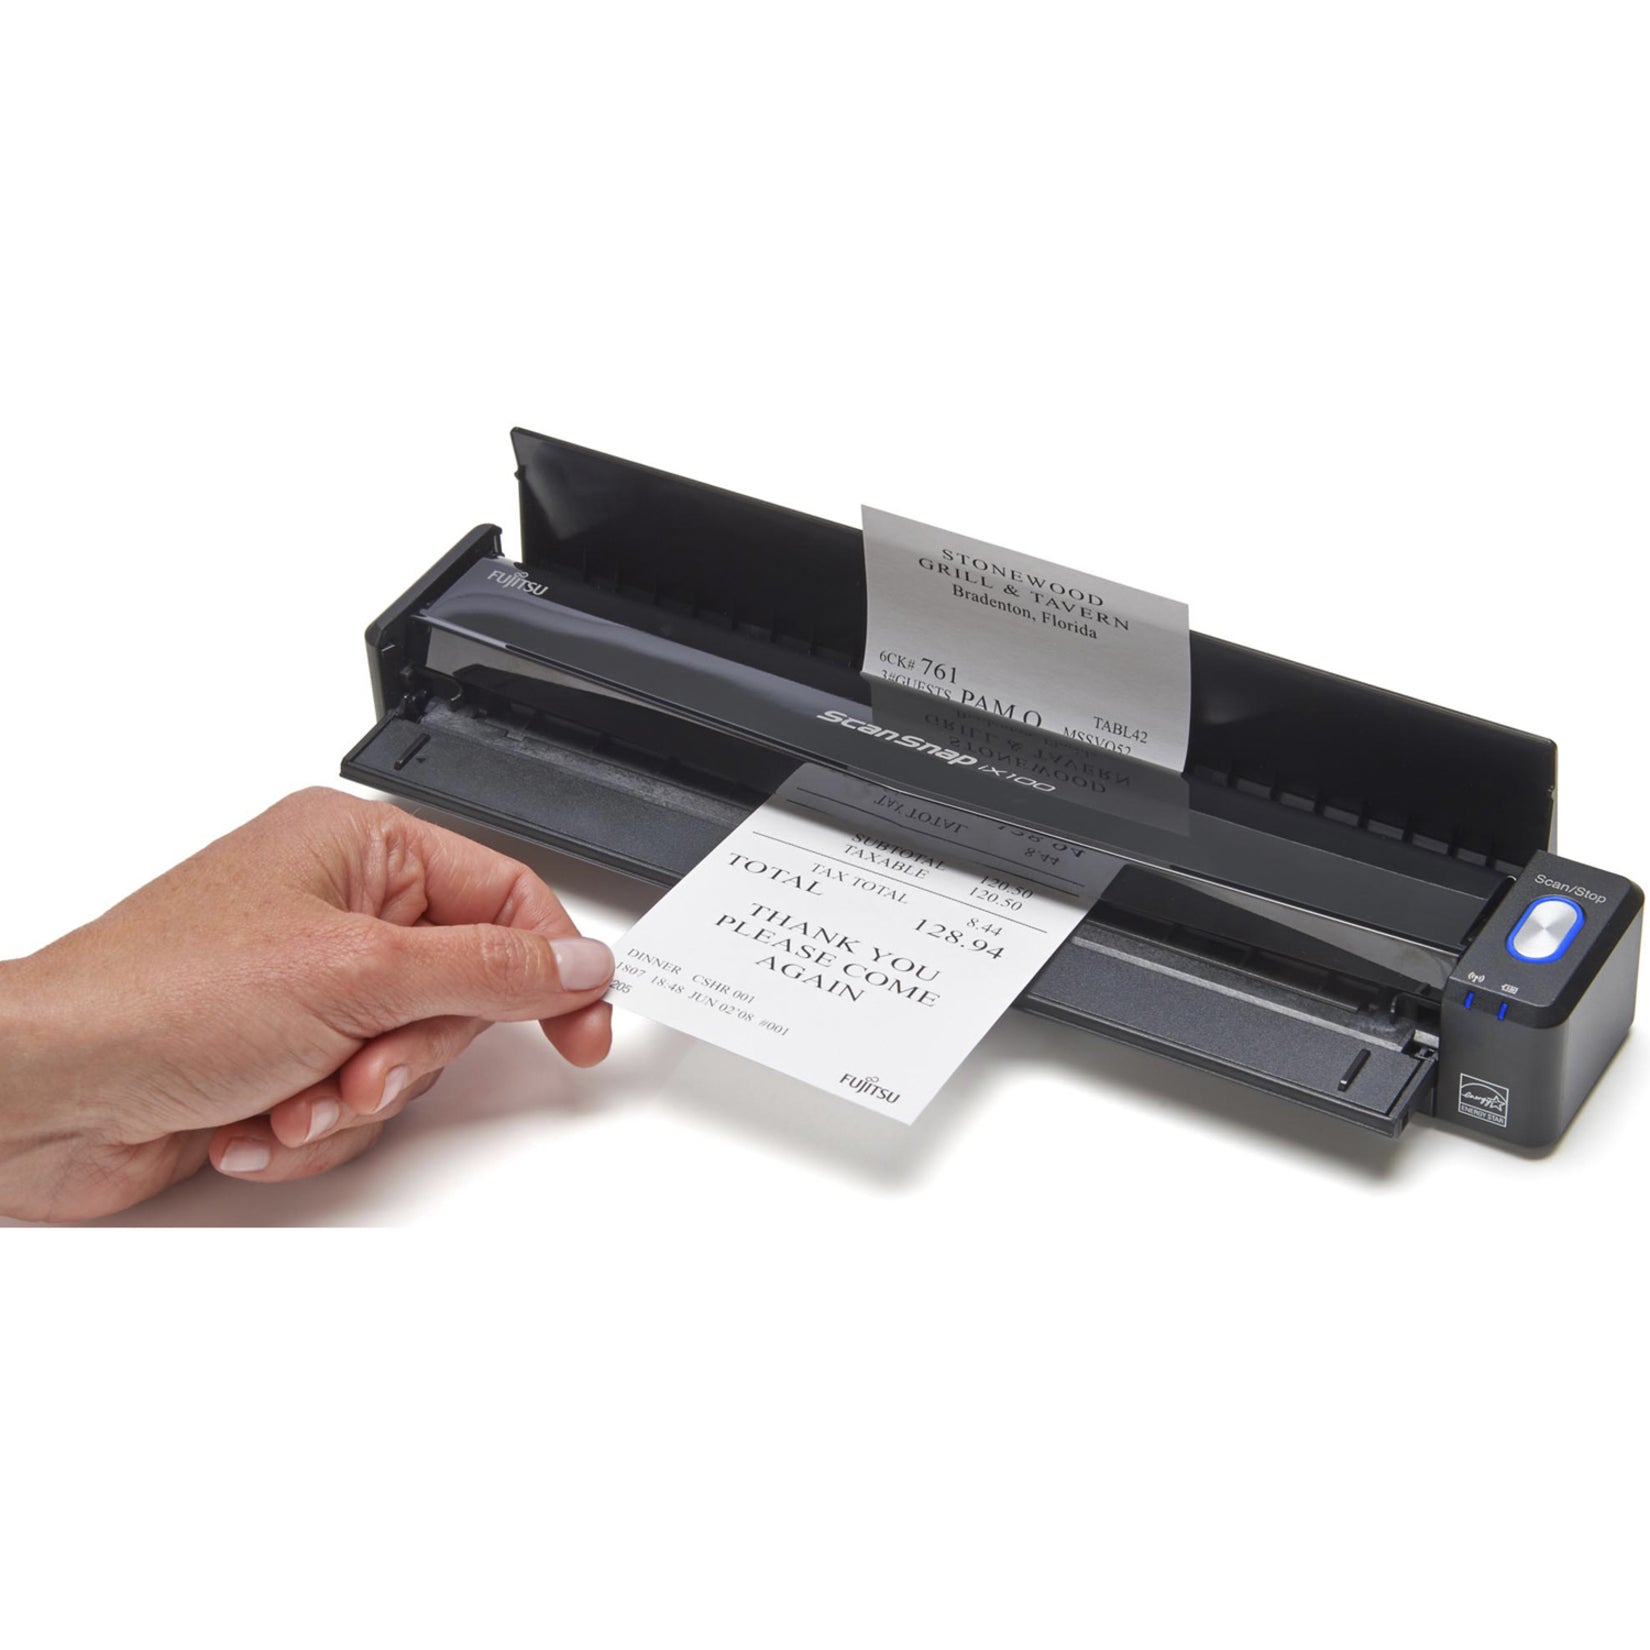 Fujitsu PA03688-B005 ScanSnap iX100 Mobile Scanner for PC and Mac, Wireless, Portable, Color Scanning